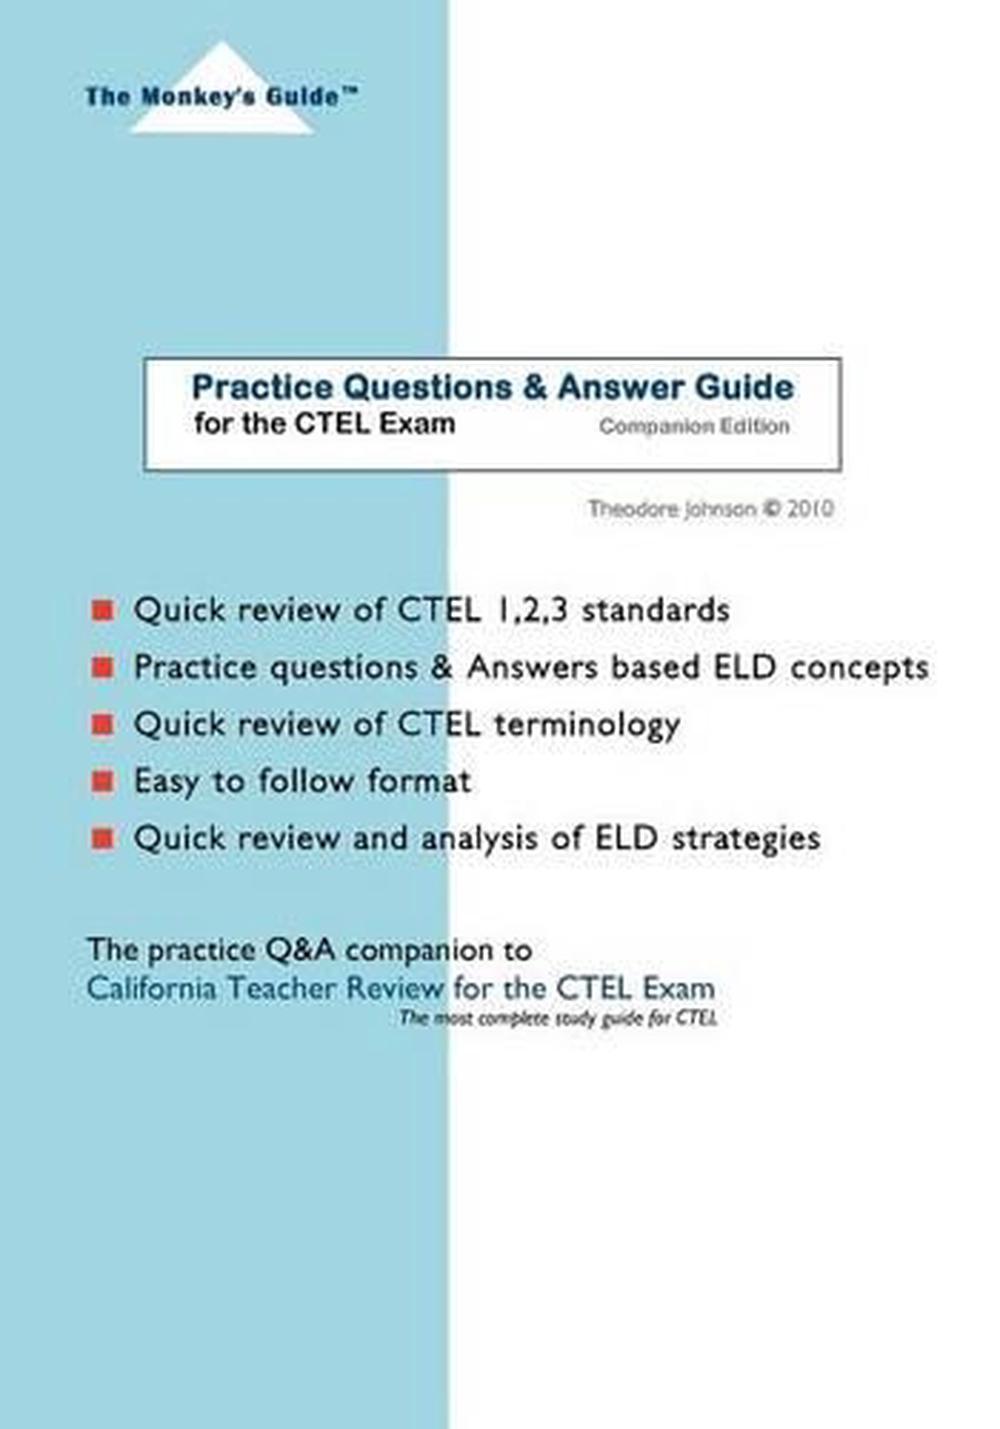 Practice Questions & Answer Guide For the Ctel Exam by Theodore